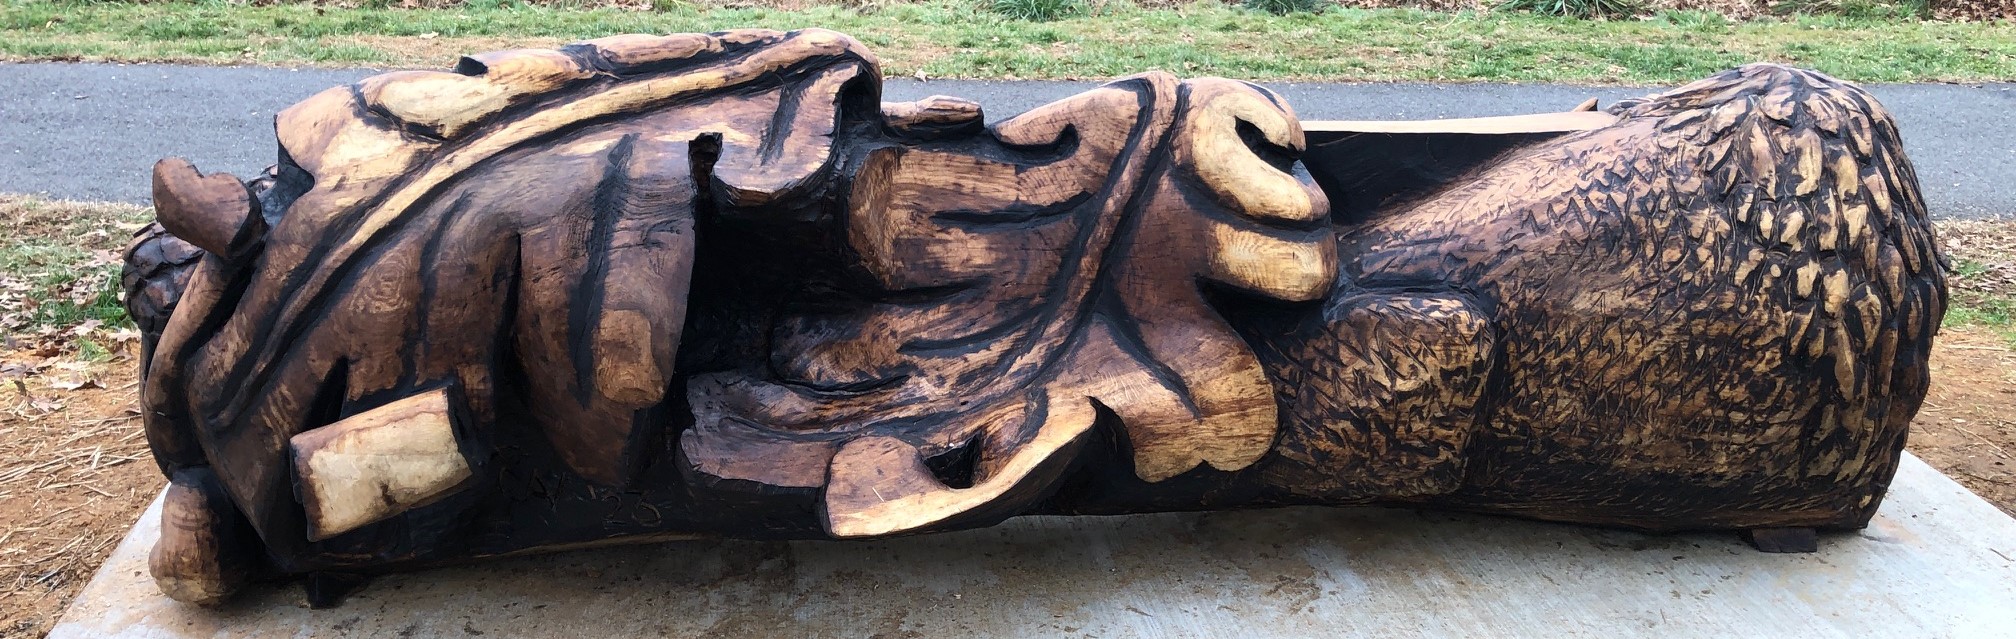 a 300-year-old tree was cut down in md. a wood sculptor transformed it.